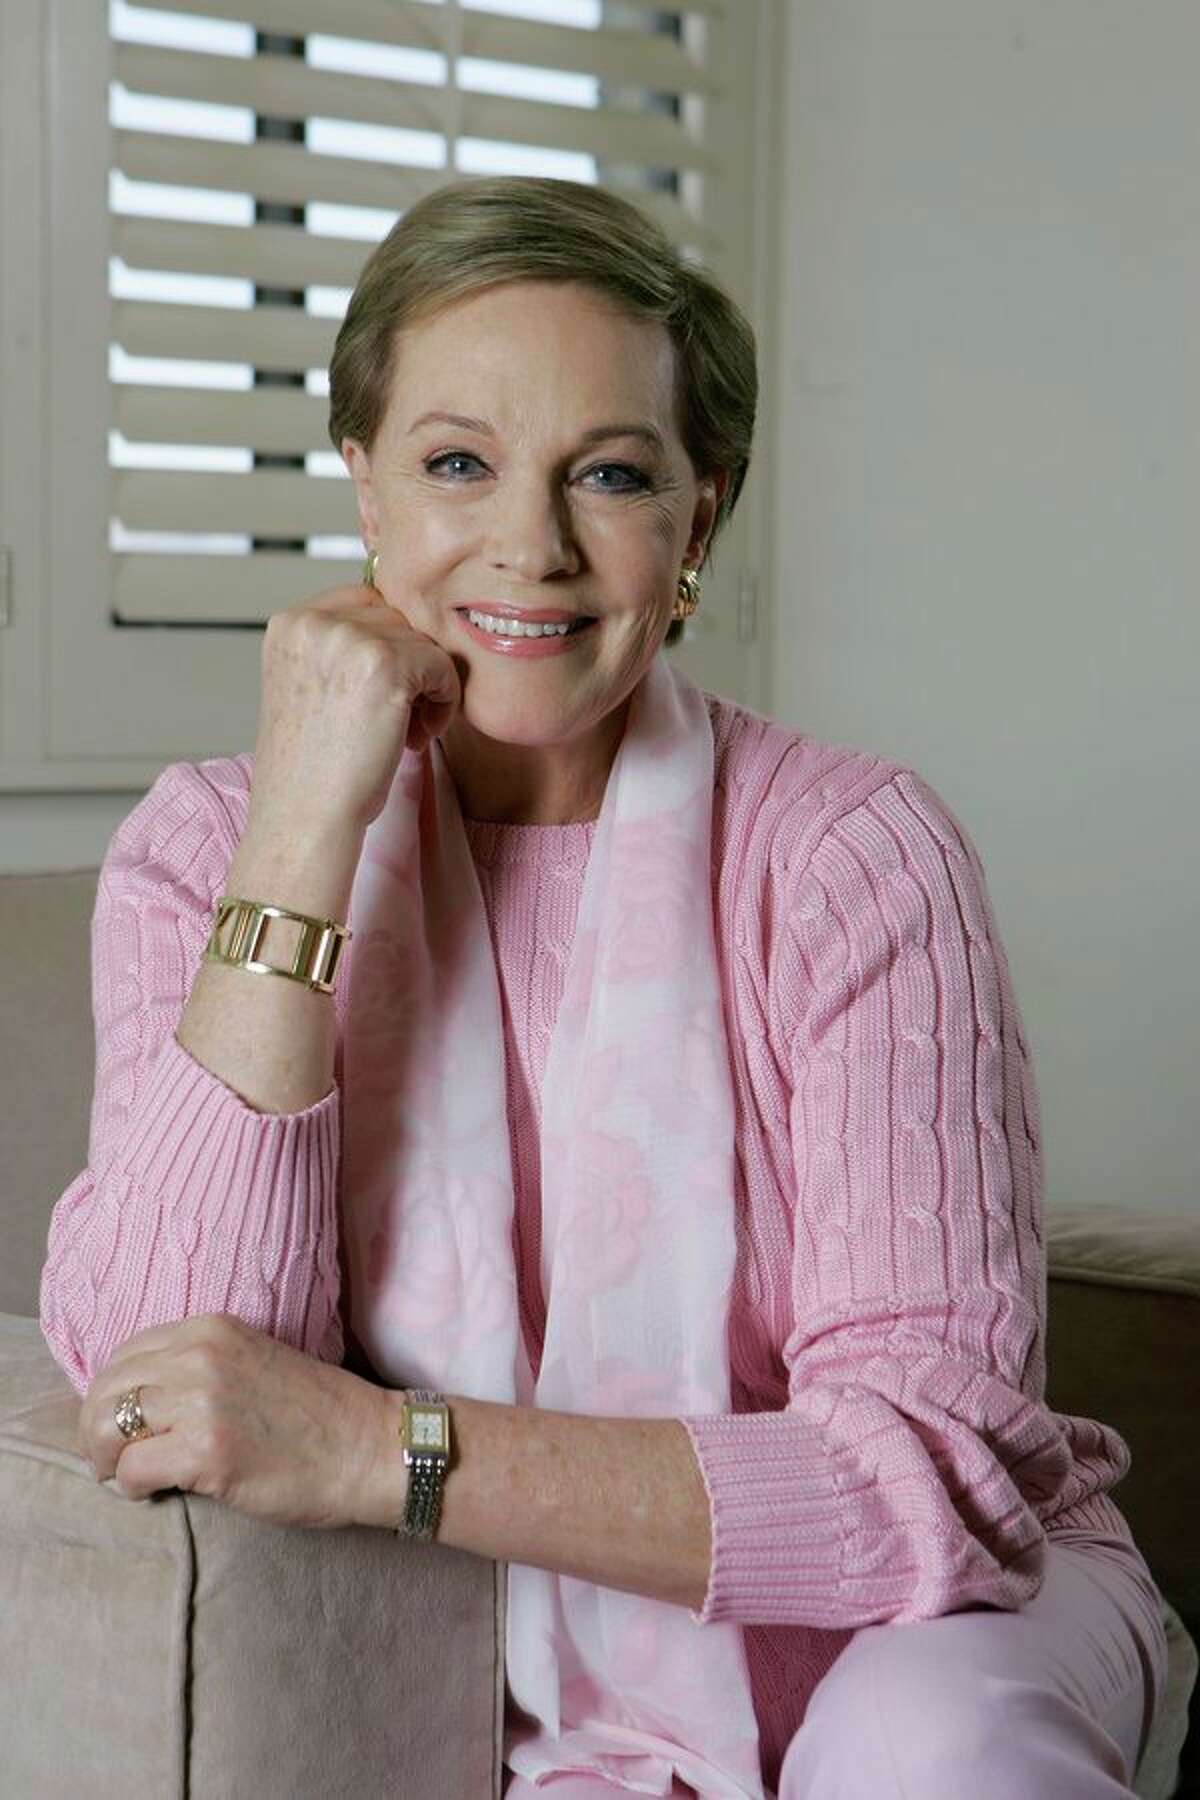 FILE - This May 5, 2007 file photo shows actress and singer Julie Andrews poses in Los Angeles. Andrews released a memoir, "Home Work: A Memoir of My Hollywood Years," which hits shelves on Oct. 15, 2019. (AP Photo/Chris Carlson, File)